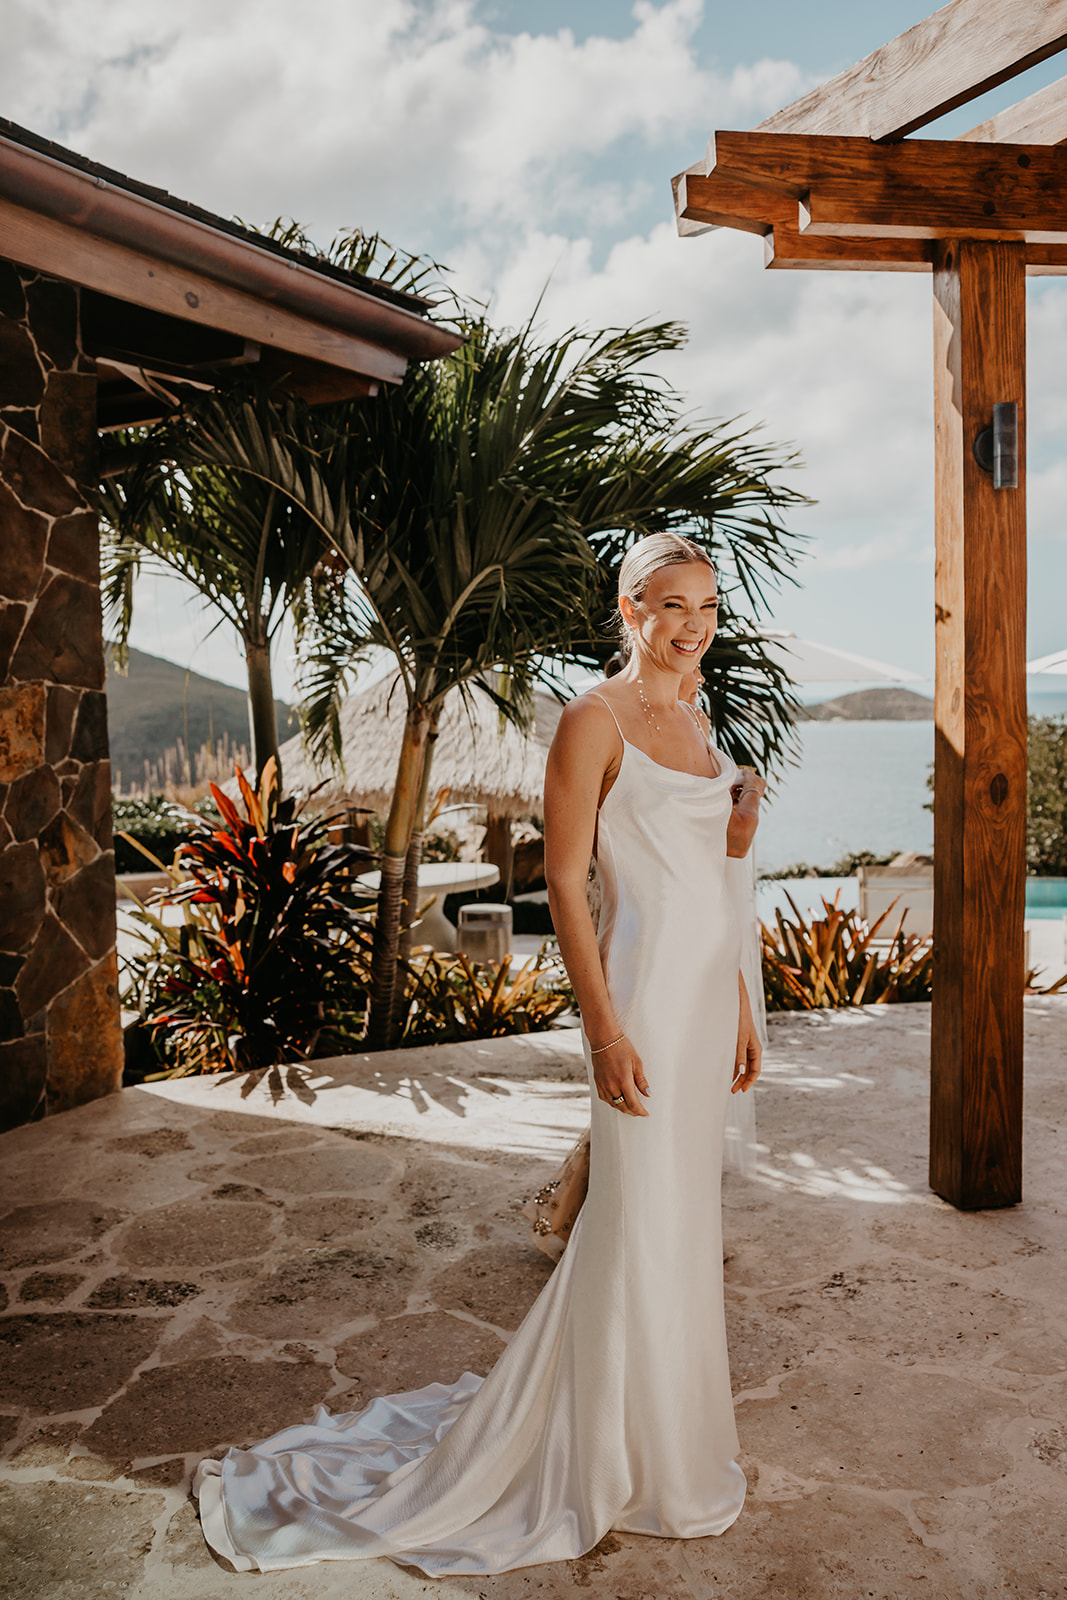 Experience a luxurious Caribbean destination wedding in the British Virgin Islands, surrounded by turquoise waters, whit